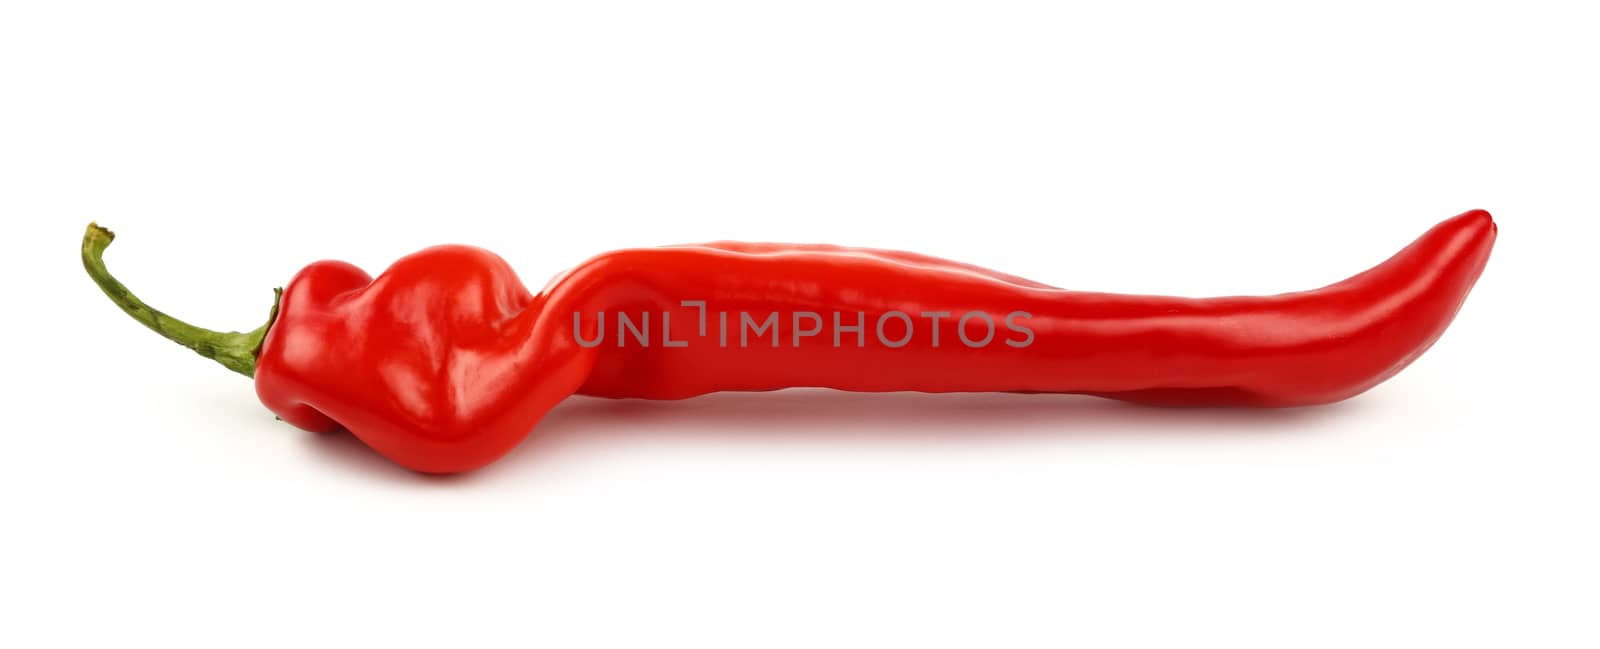 One whole fresh red sweet paprika pepper isolated on white background, close up, side low angle view